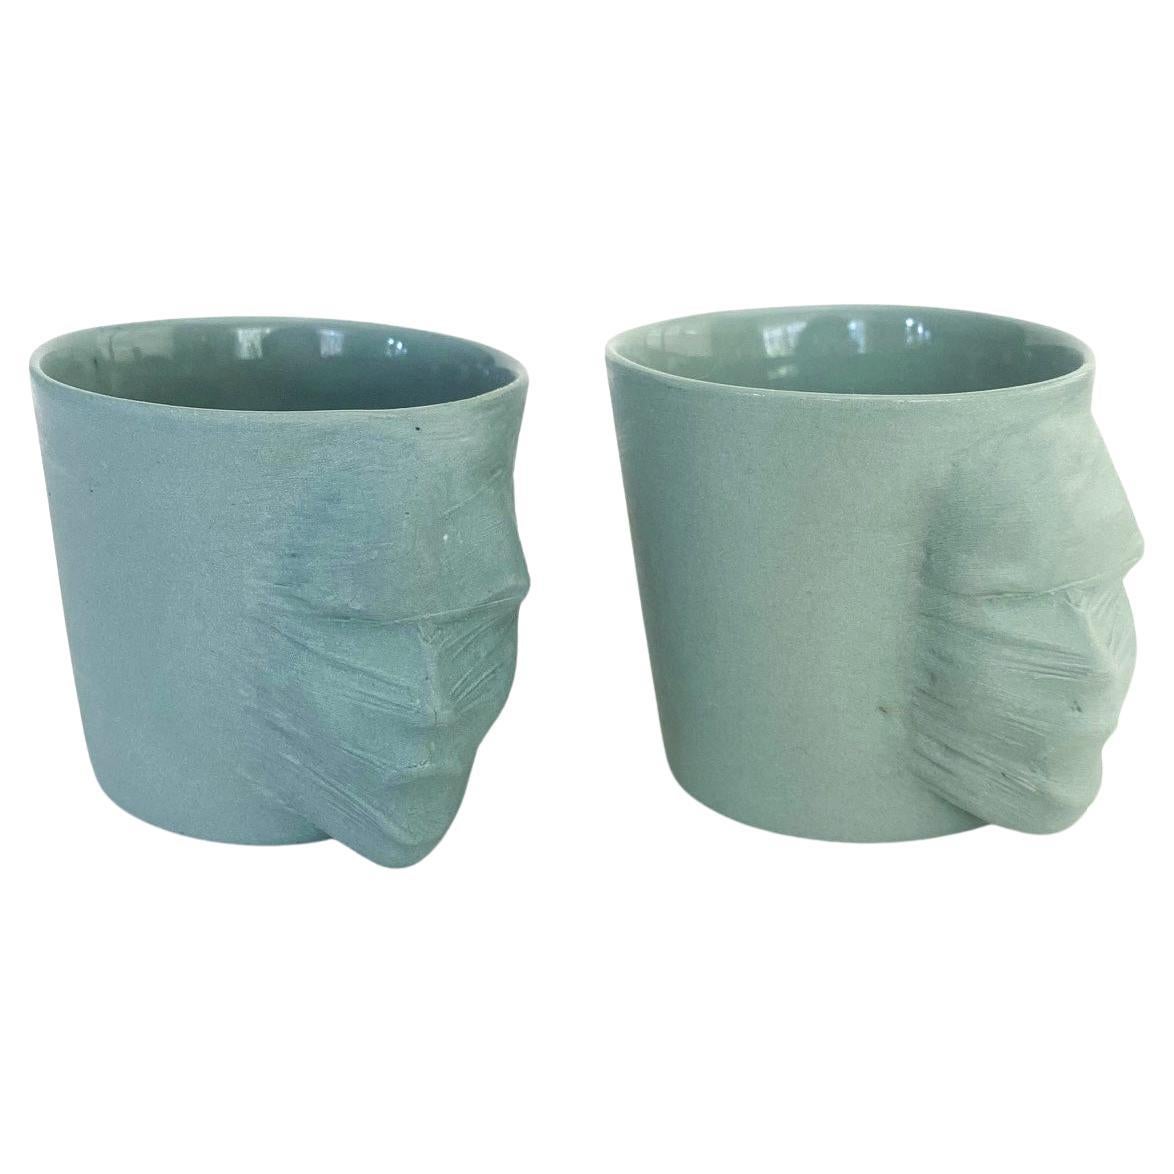 Sculptural Porcelain Cups Set of 2 by Hulya Sozer, Silhouette, Turquoise Shades For Sale